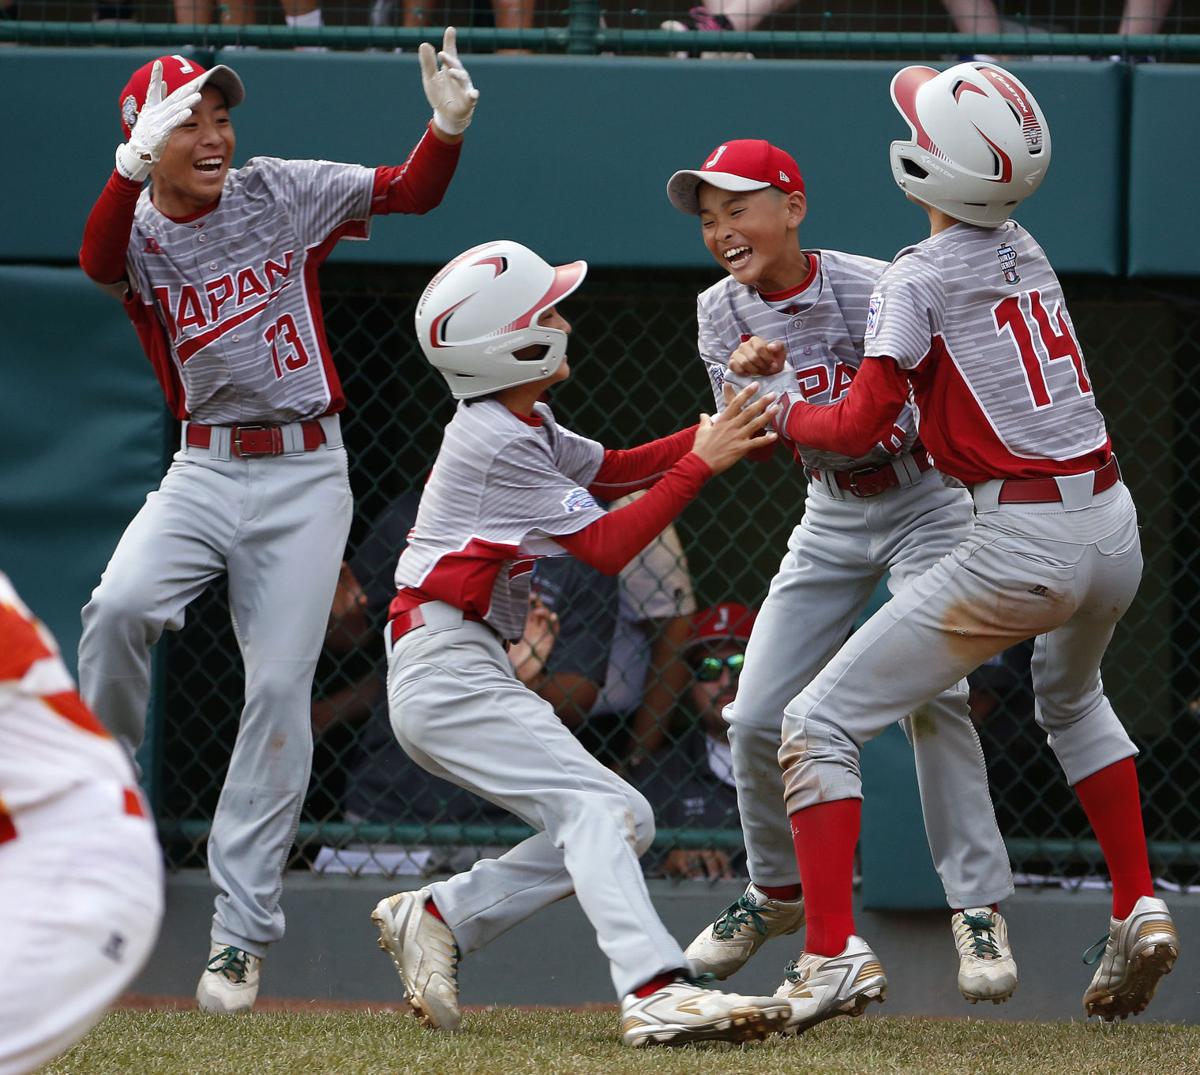 Japan powers its way to LLWS title